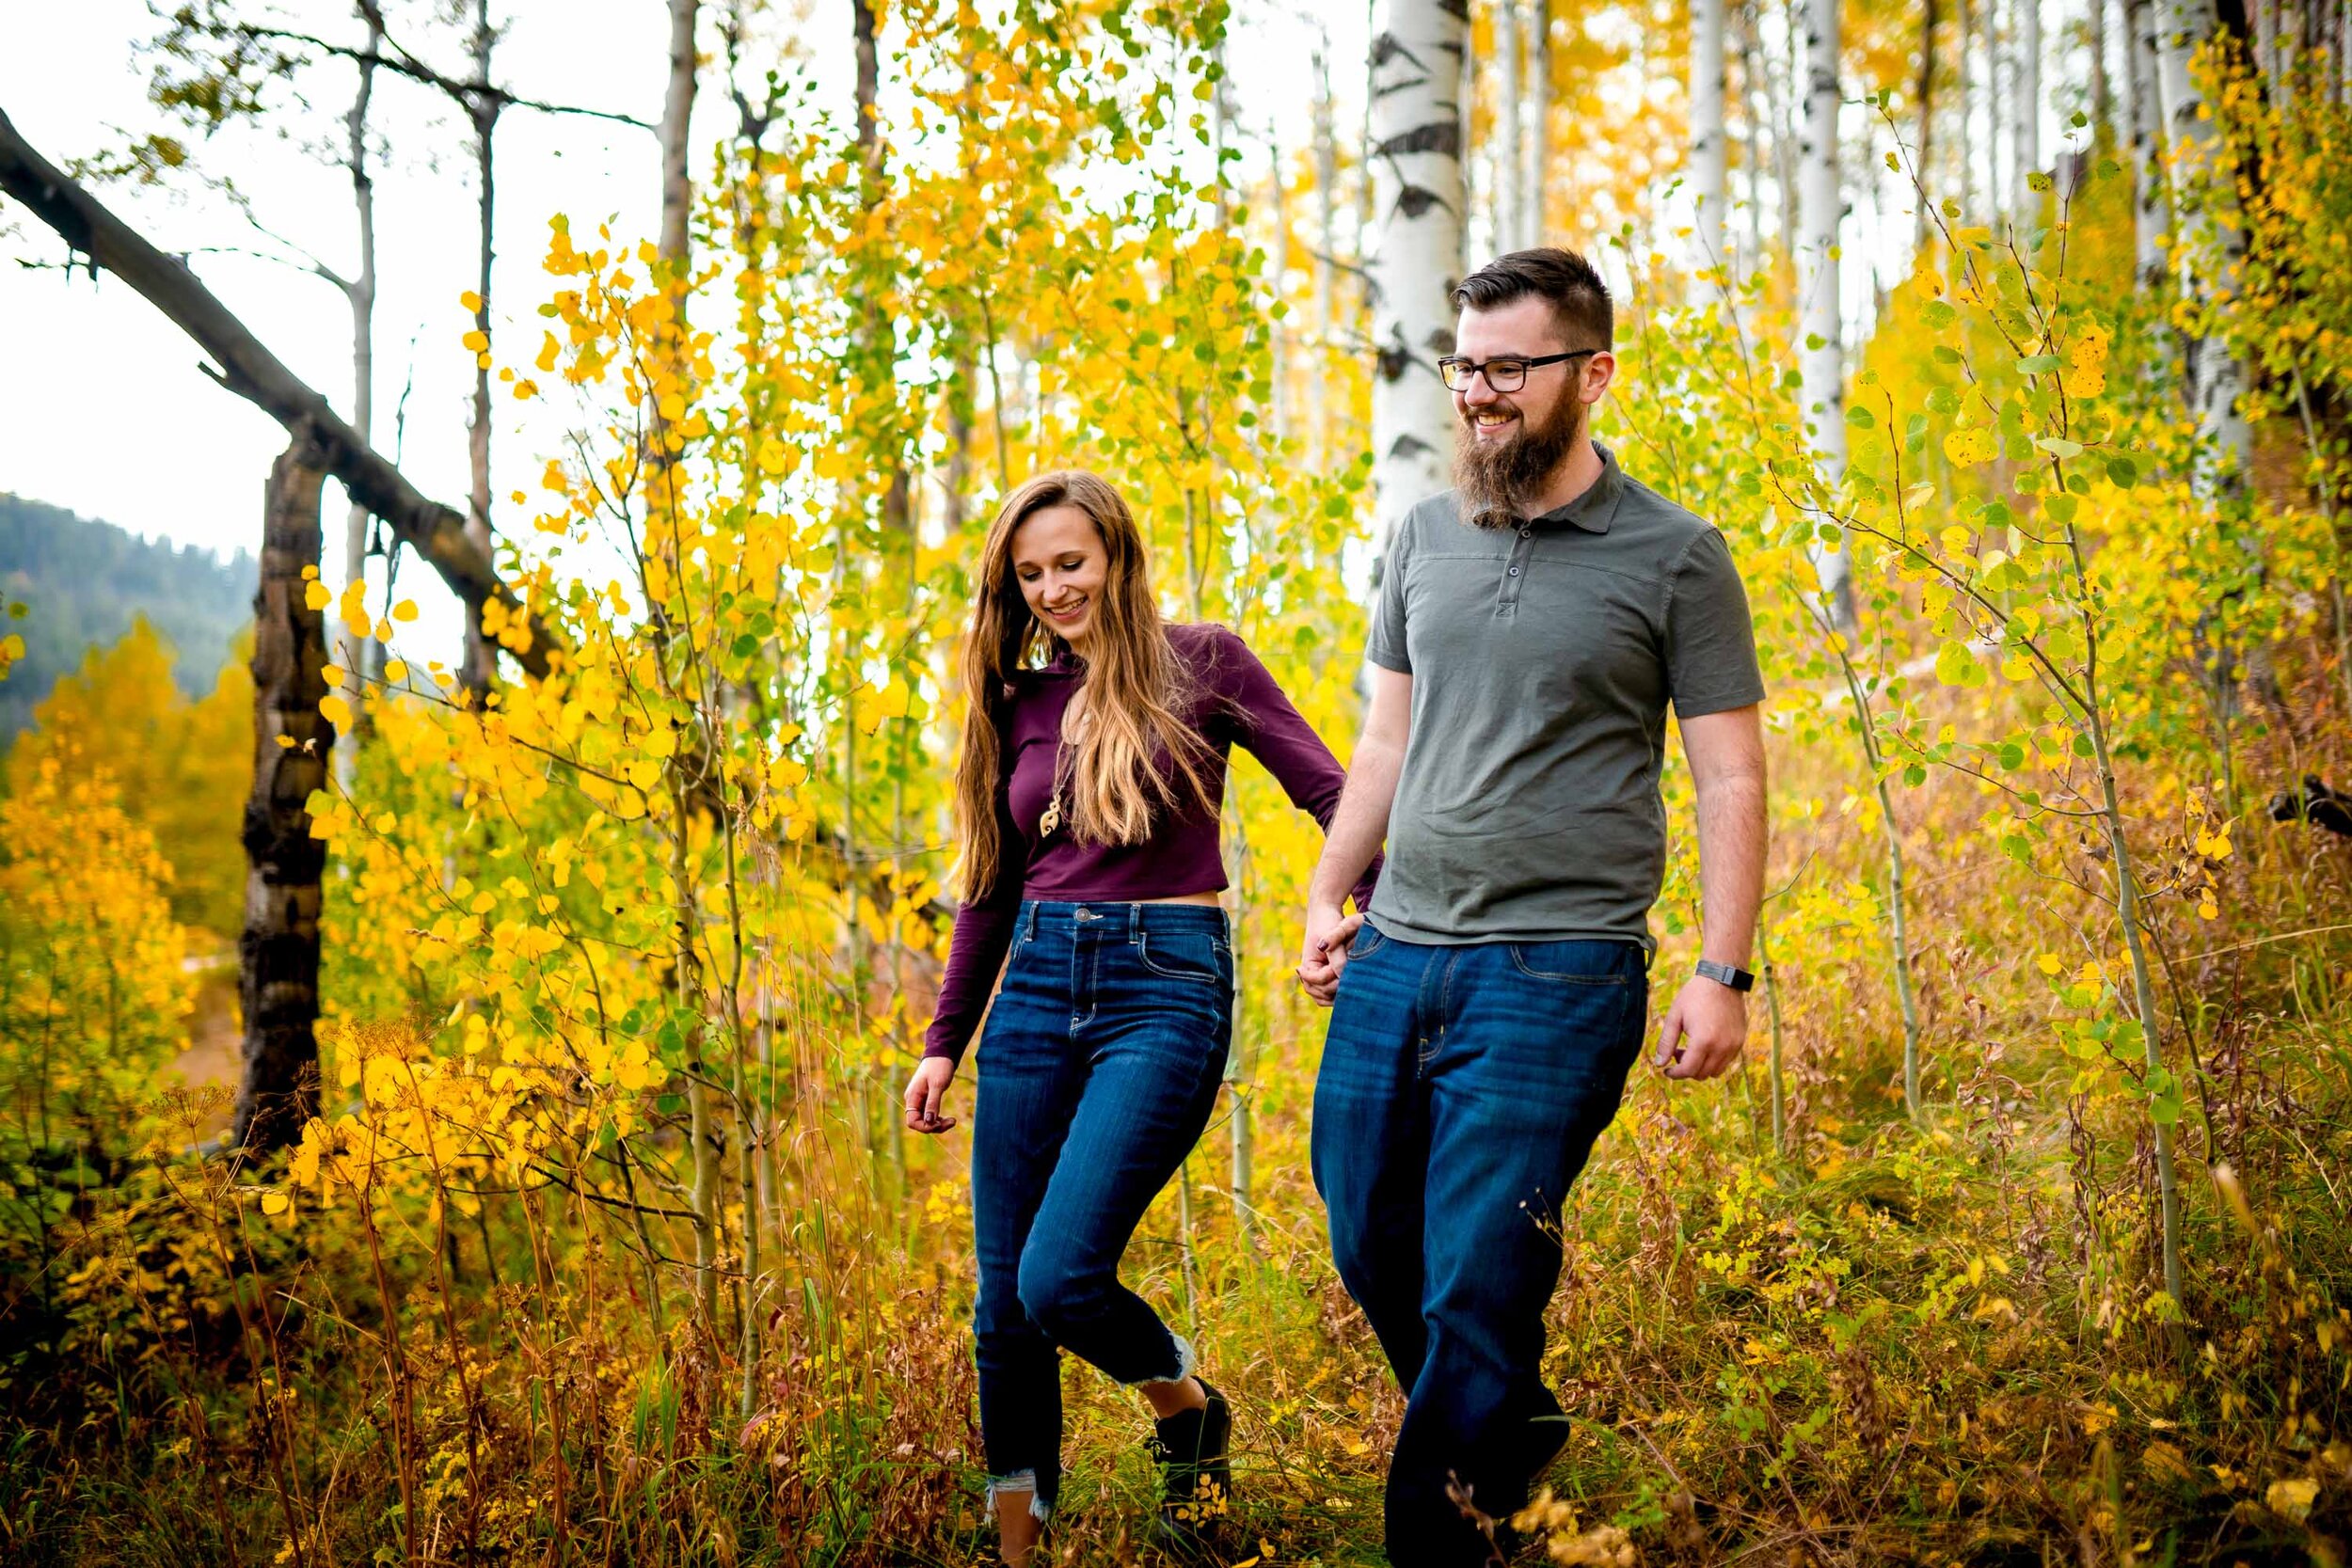 Engaged couple embraces for a portrait while surrounded by golden Aspen trees, Engagement Session, Engagement Photos, Engagement Photos Inspiration, Engagement Photography, Engagement Photographer, Fall Engagement Photos, Mountain Engagement Photos, Piney River Ranch engagement photos, Vail engagement session, Vail engagement photos, Vail engagement photography, Vail engagement photographer, Vail engagement inspiration, Colorado engagement session, Colorado engagement photos, Colorado engagement photography, Colorado engagement photographer, Colorado engagement inspiration